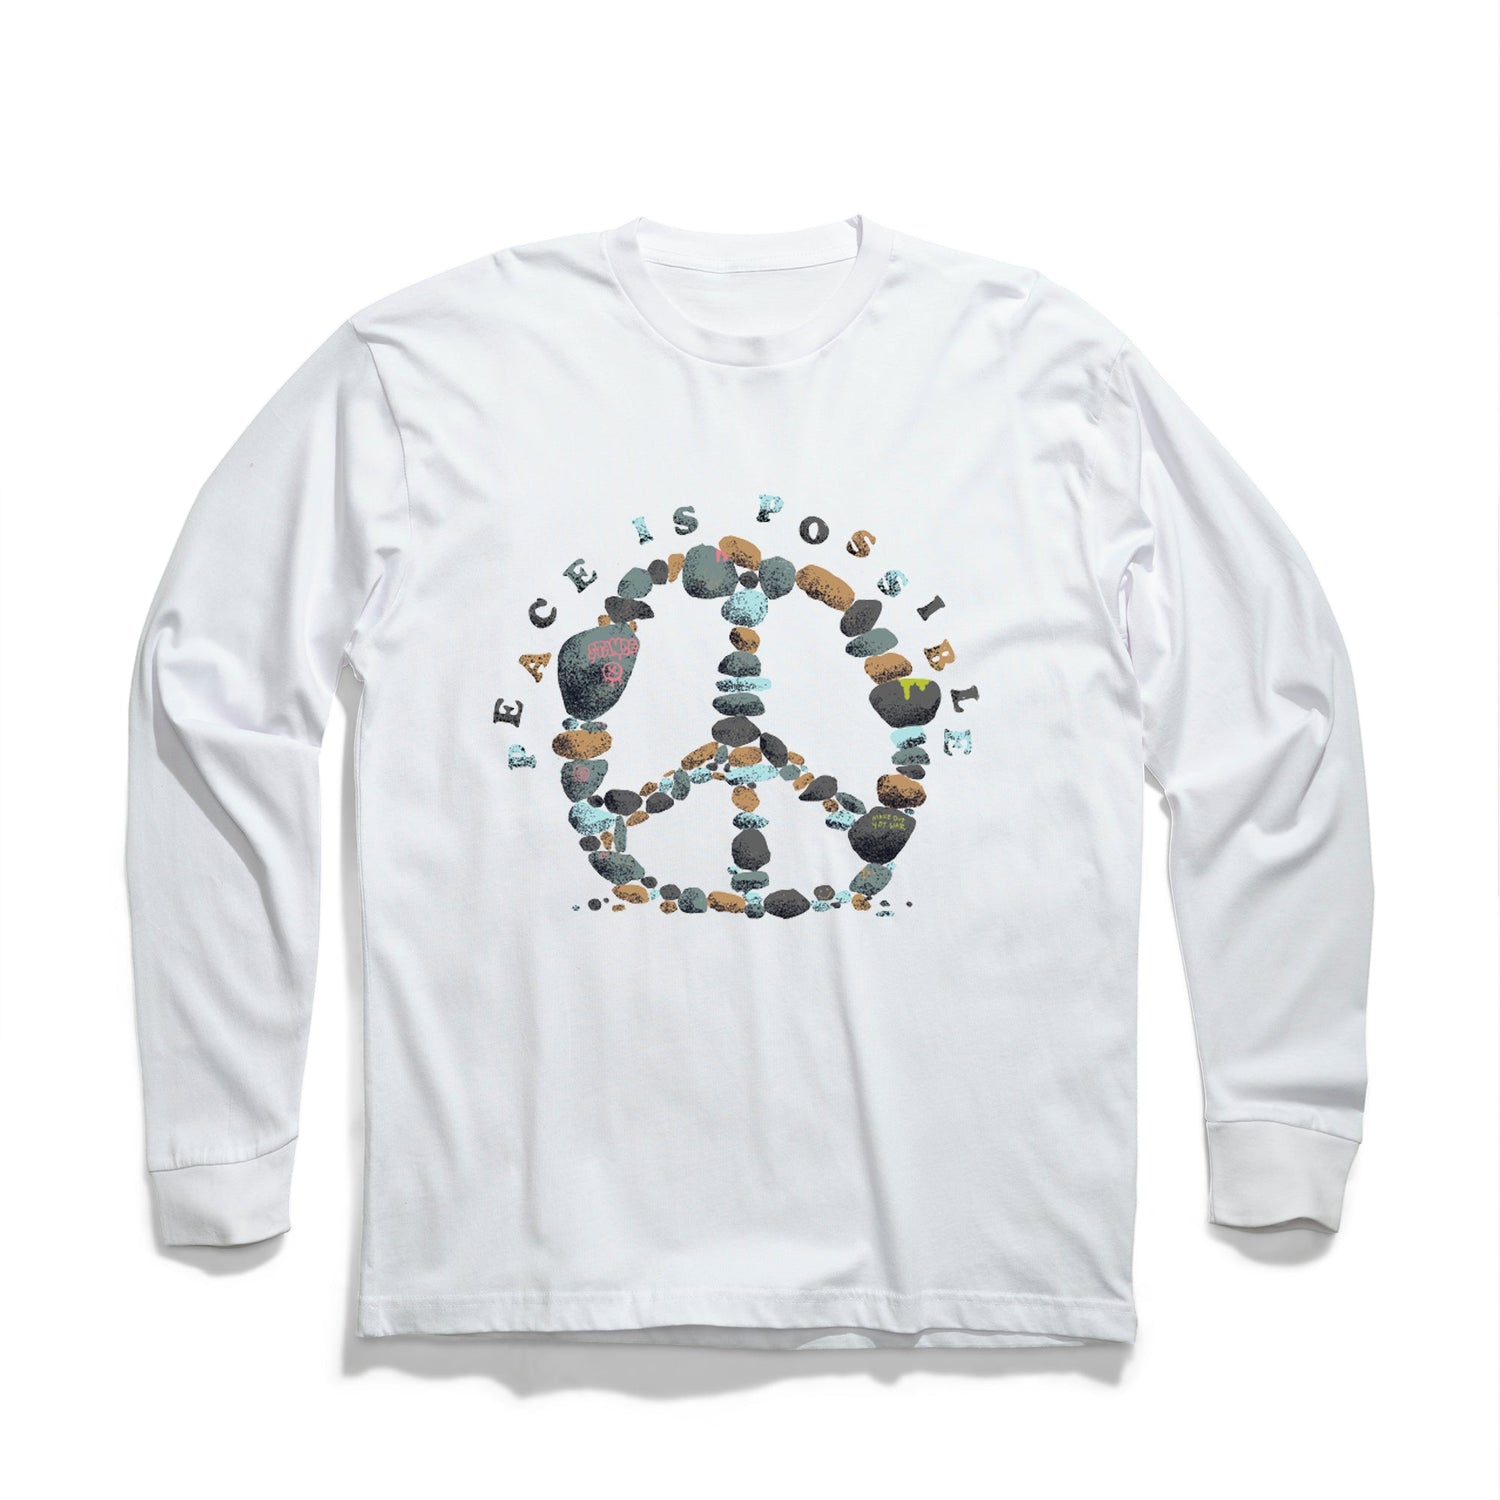 Stance Locals Long Sleeve T-Shirt White